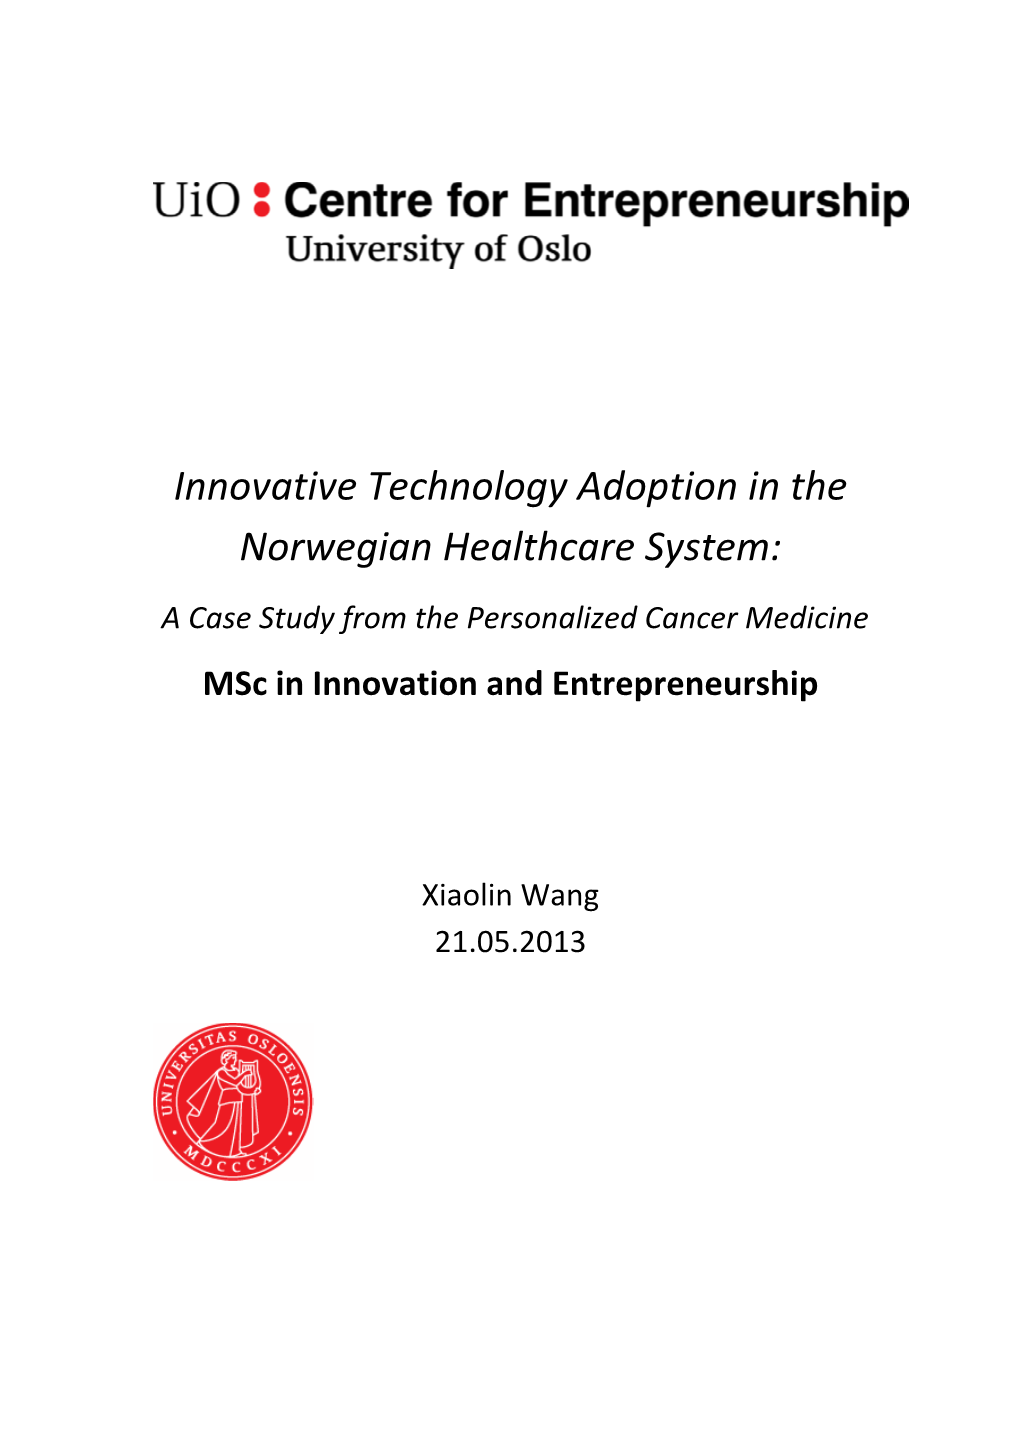 Innovative Technology Adoption in the Norwegian Healthcare System: a Case Study from the Personalized Cancer Medicine Msc in Innovation and Entrepreneurship